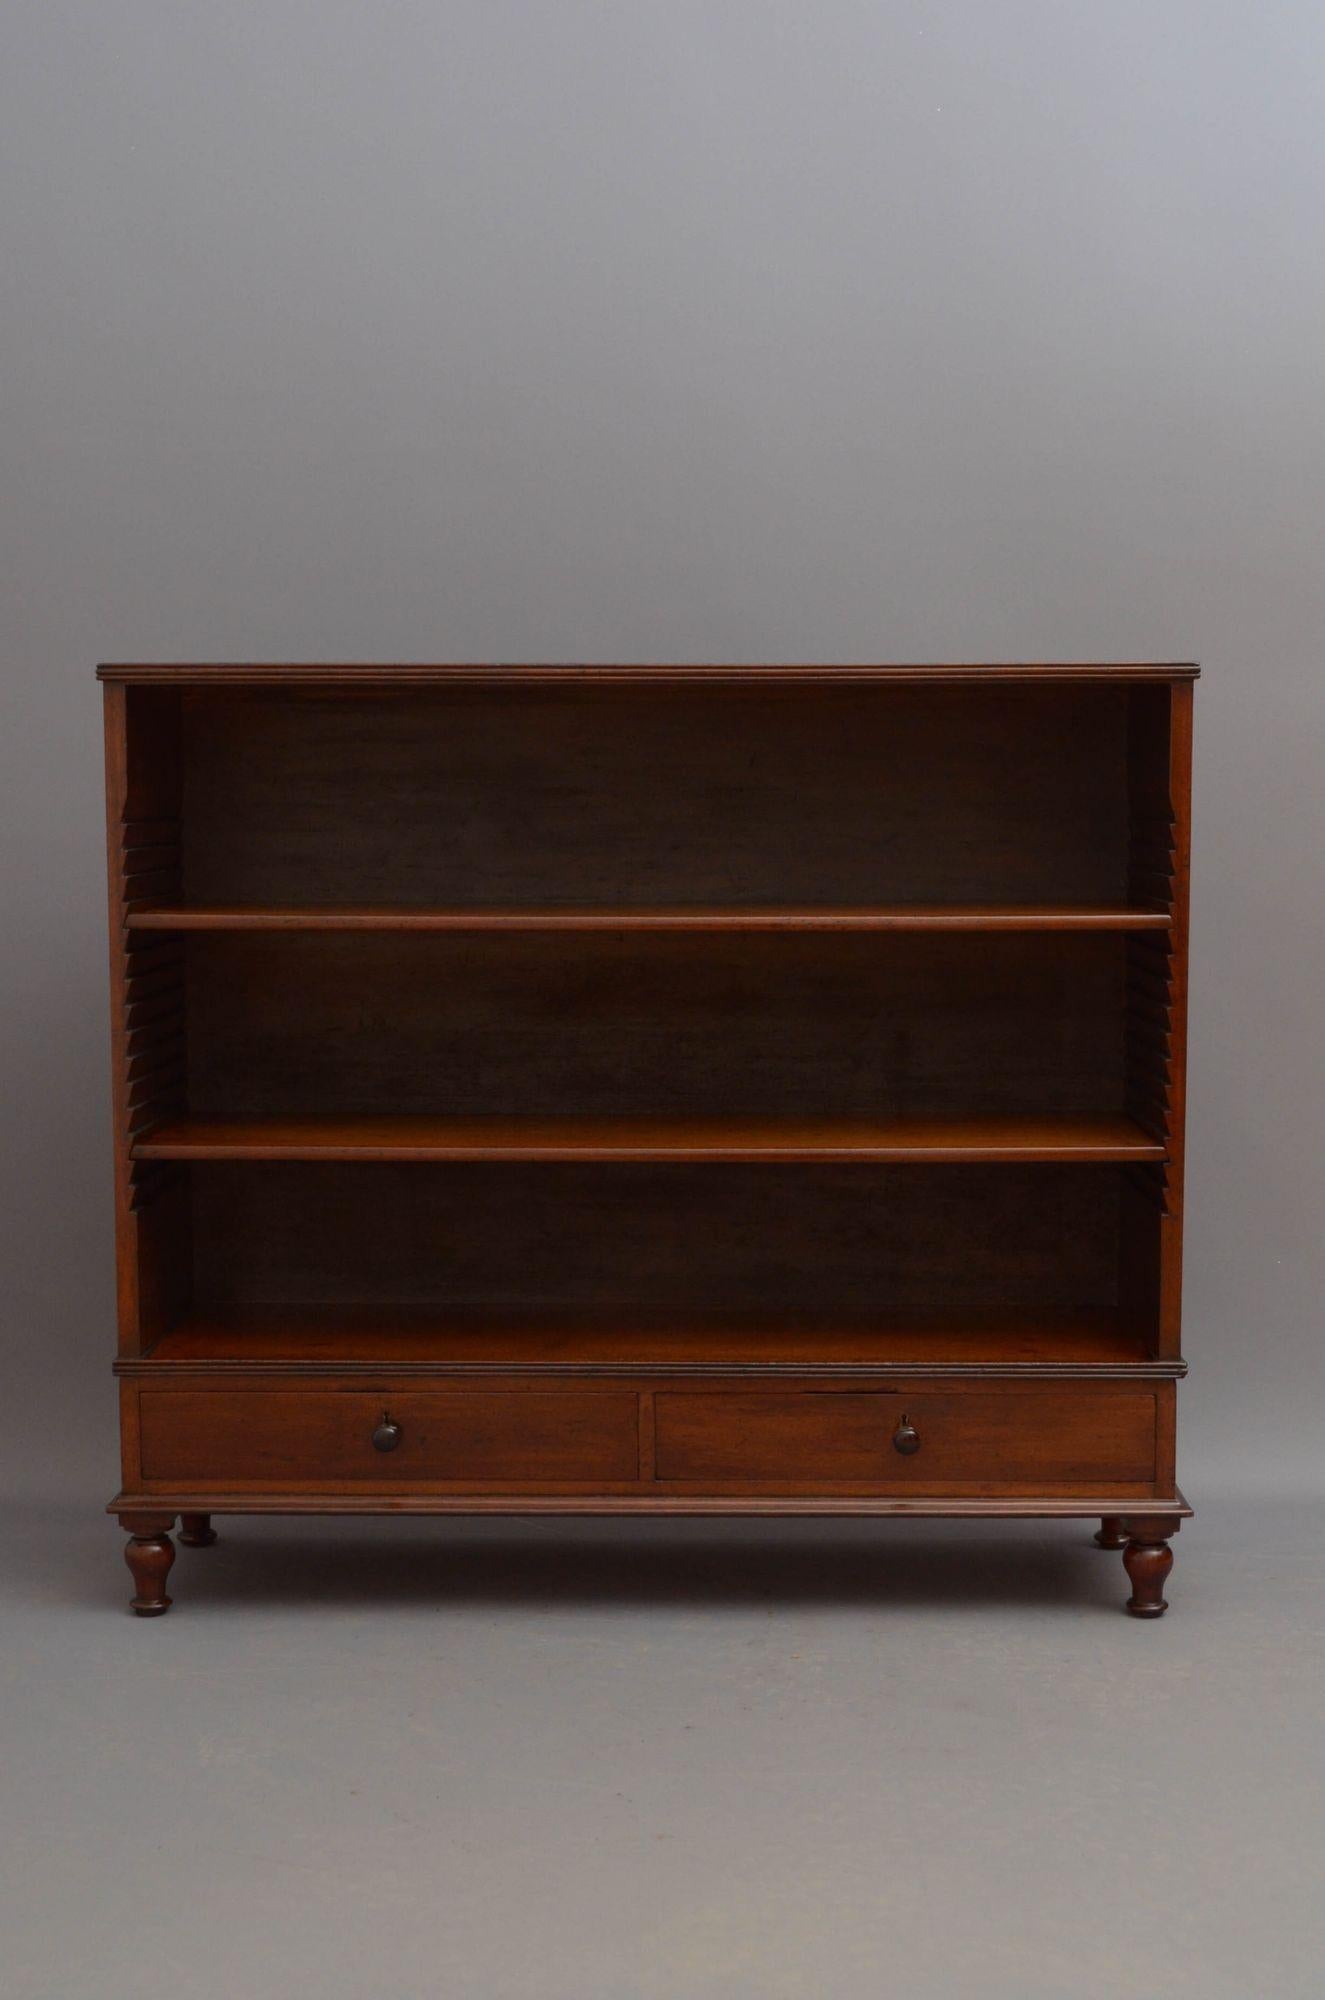 19th Century A Low Georgian Solid Mahogany Open Bookcase